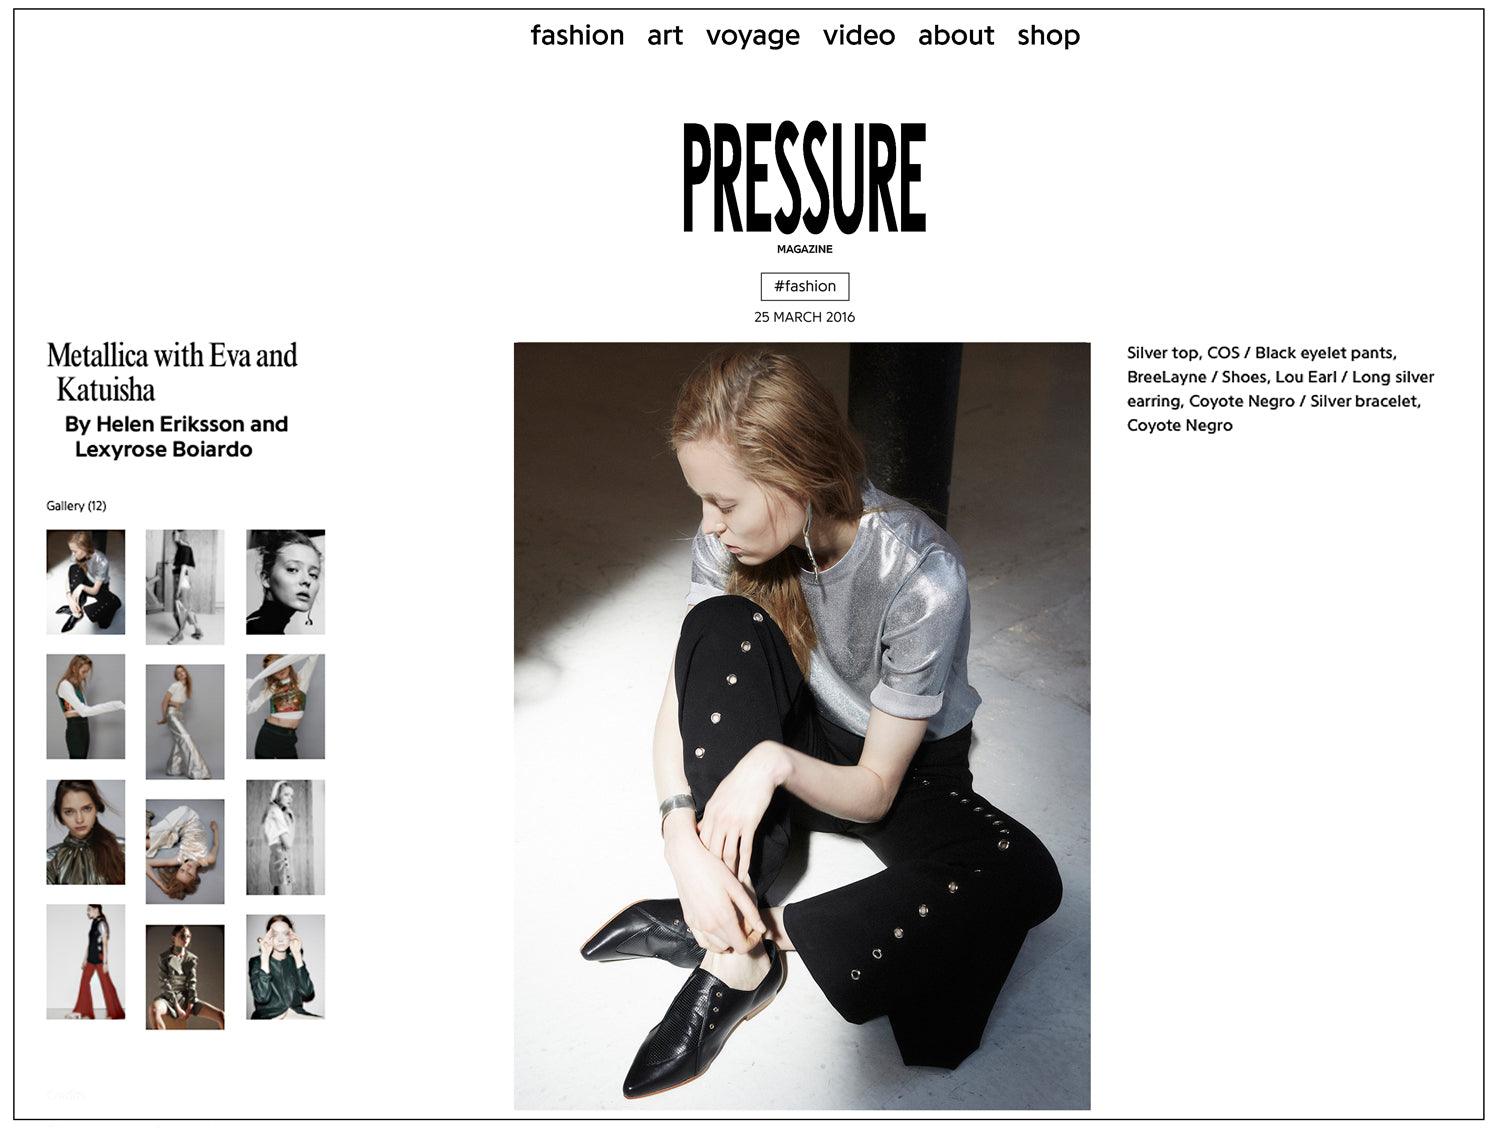 LOU.EARL Eleanor lace up oxford shoes featured in Pressure Paris Magazine fashion editorial.